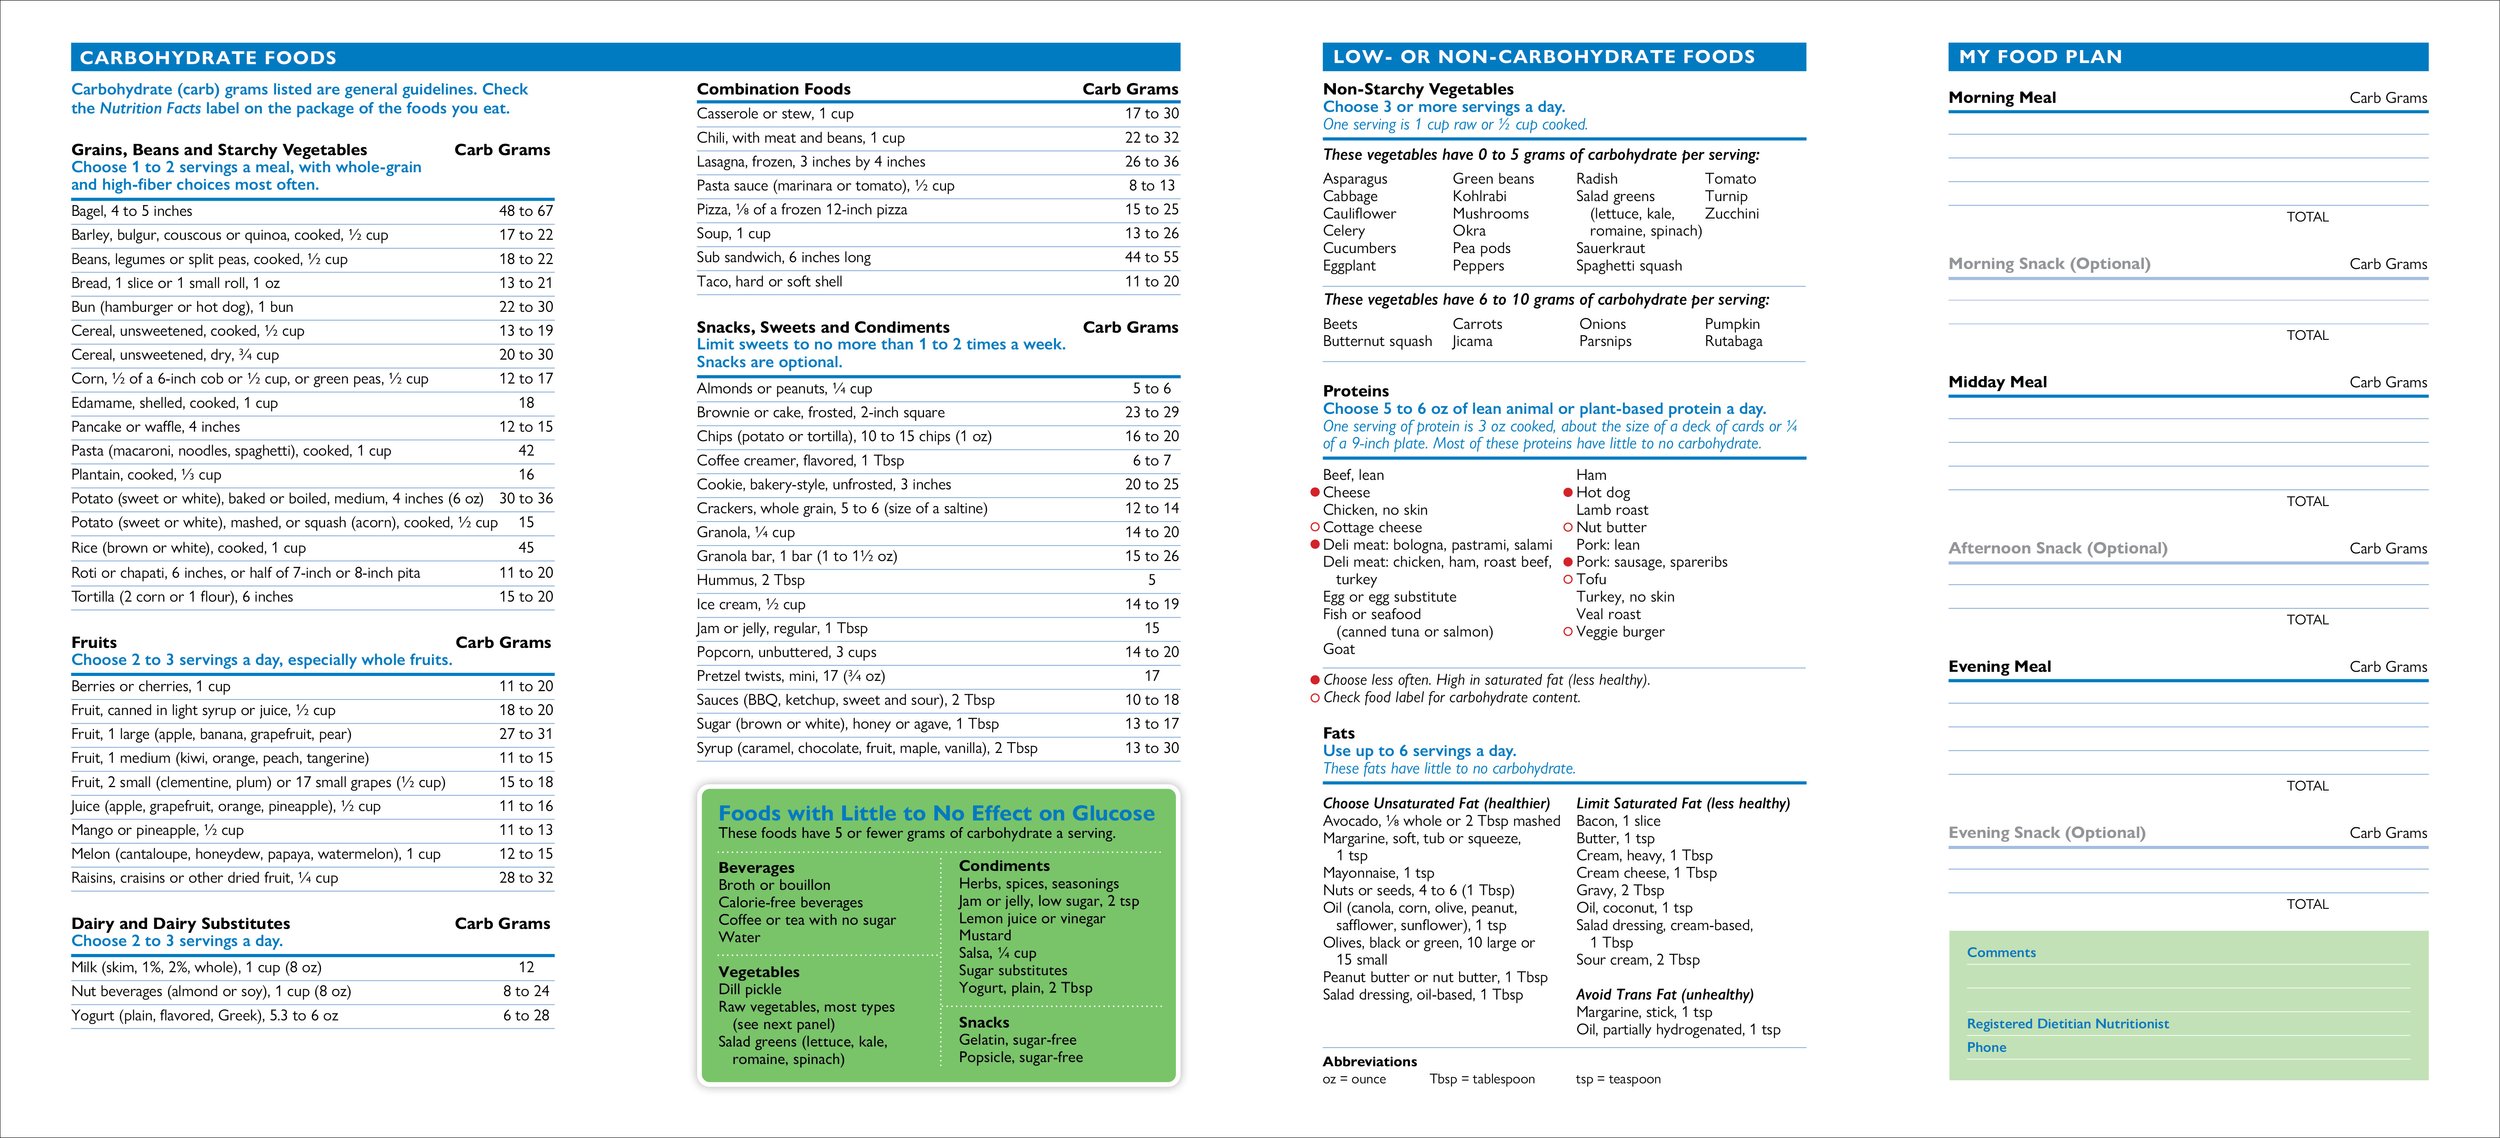   My Food Plan  brochure developed by the International Diabetes Center and HealthPartners 